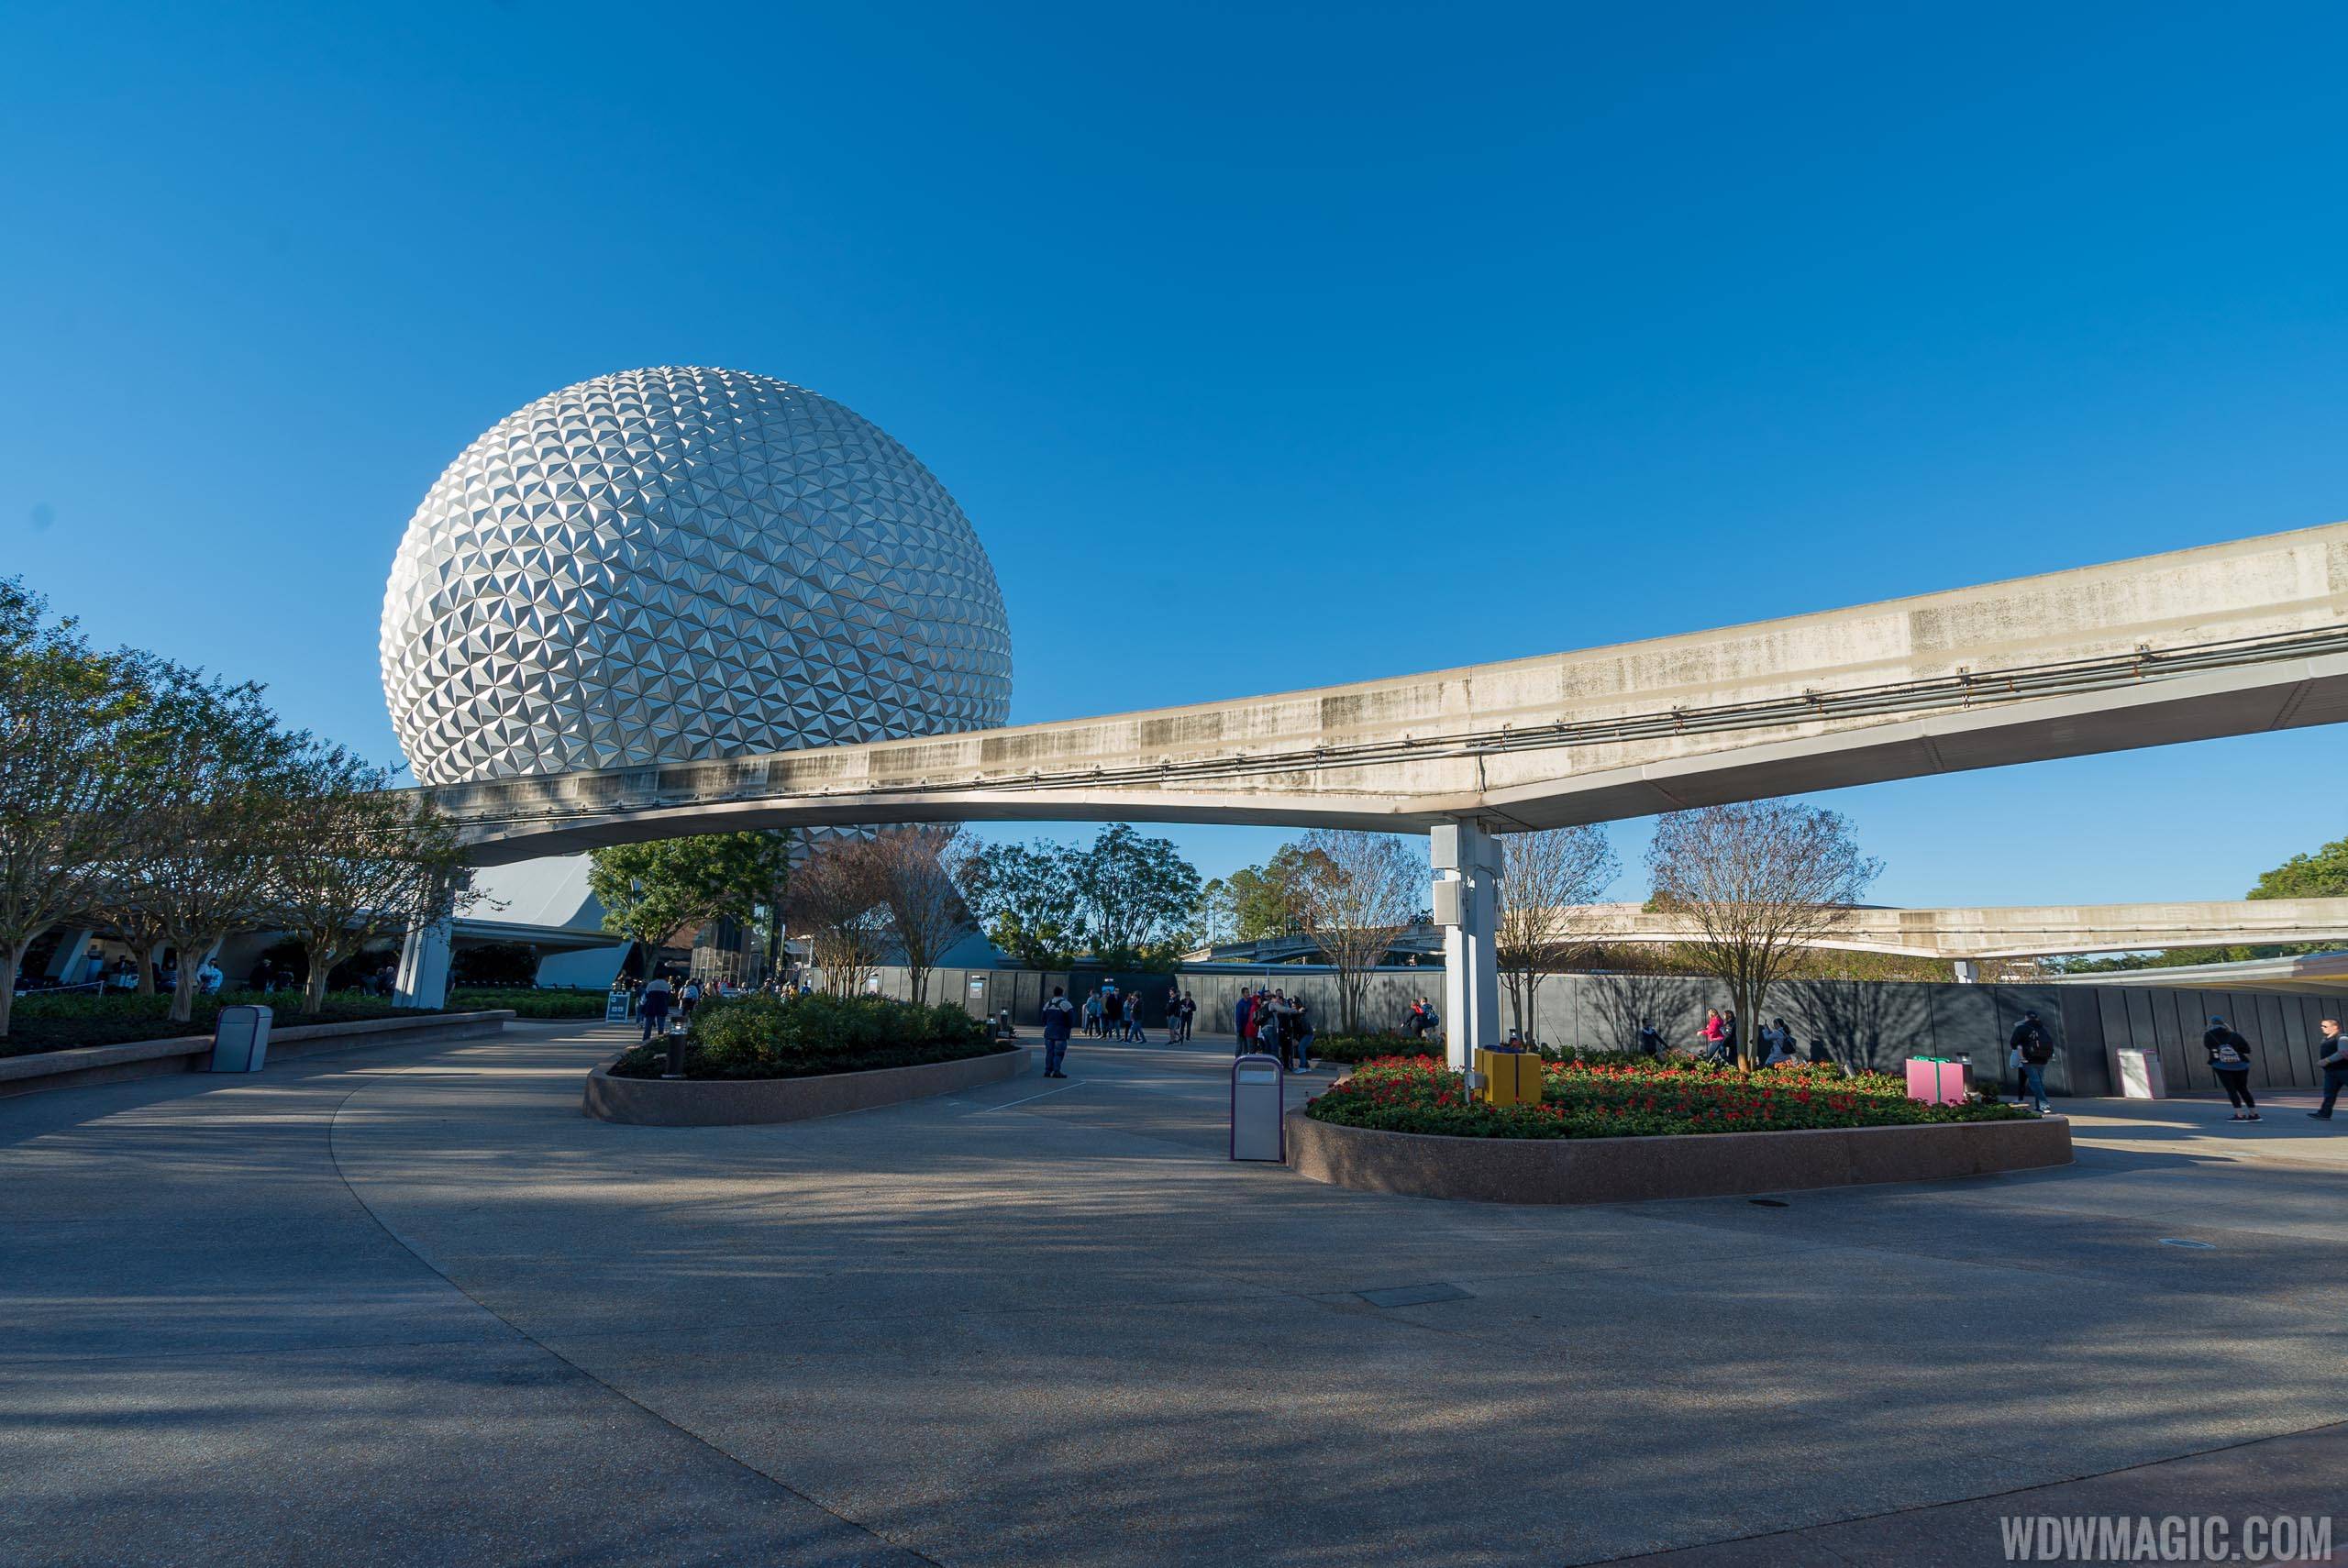 Epcot central area construction - January 2020